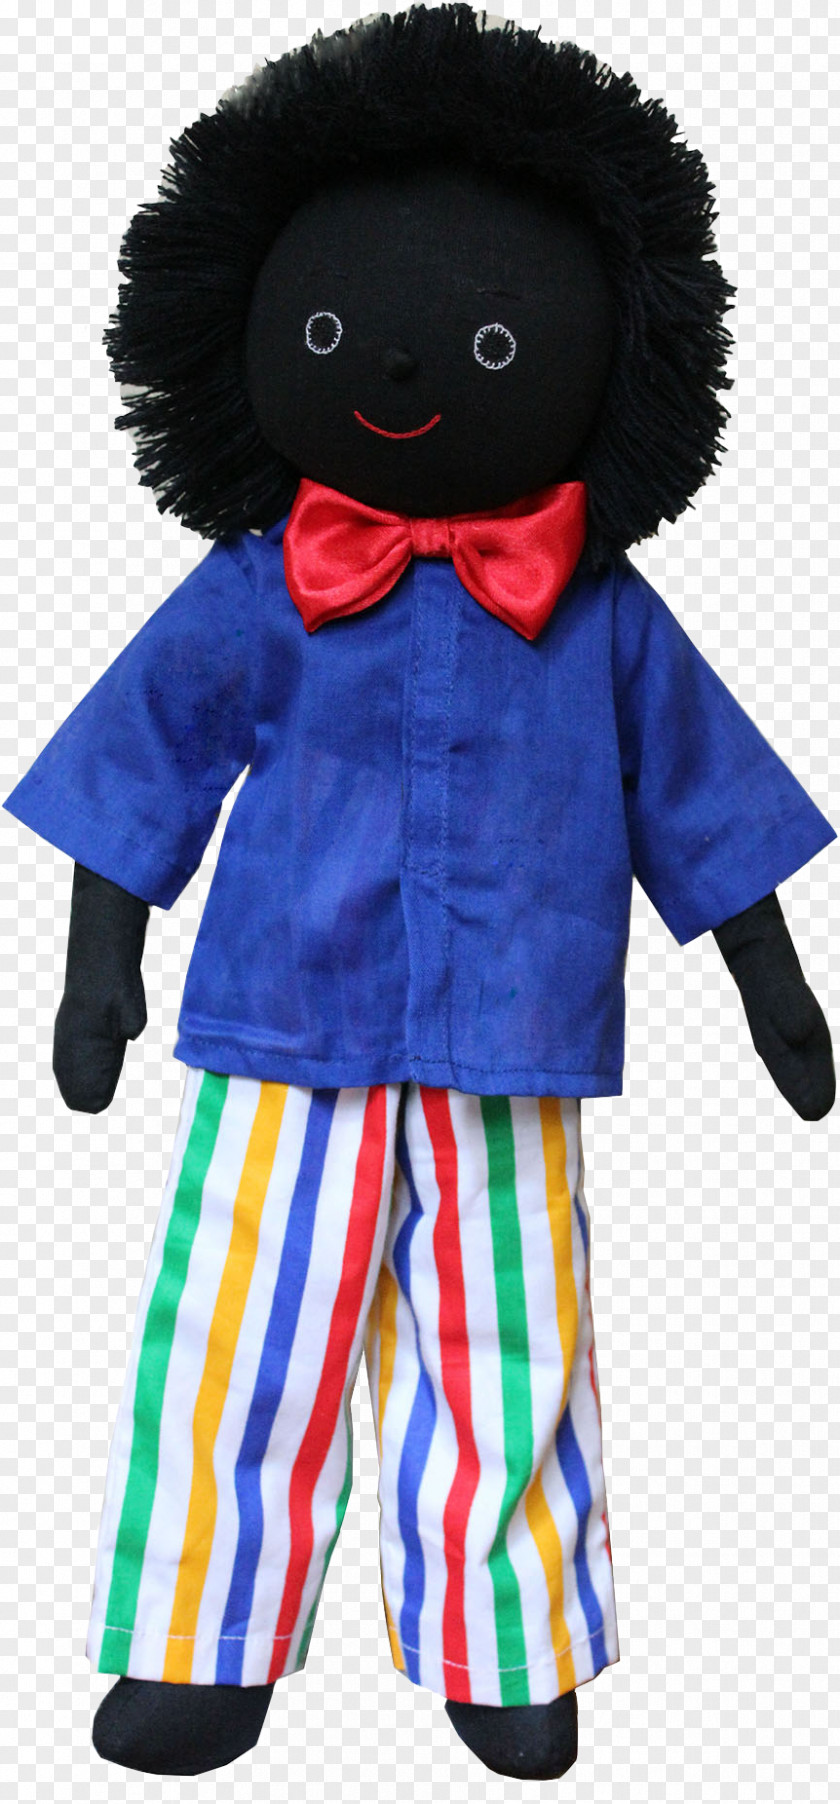 Doll Golliwog Stuffed Animals & Cuddly Toys Merrythought PNG